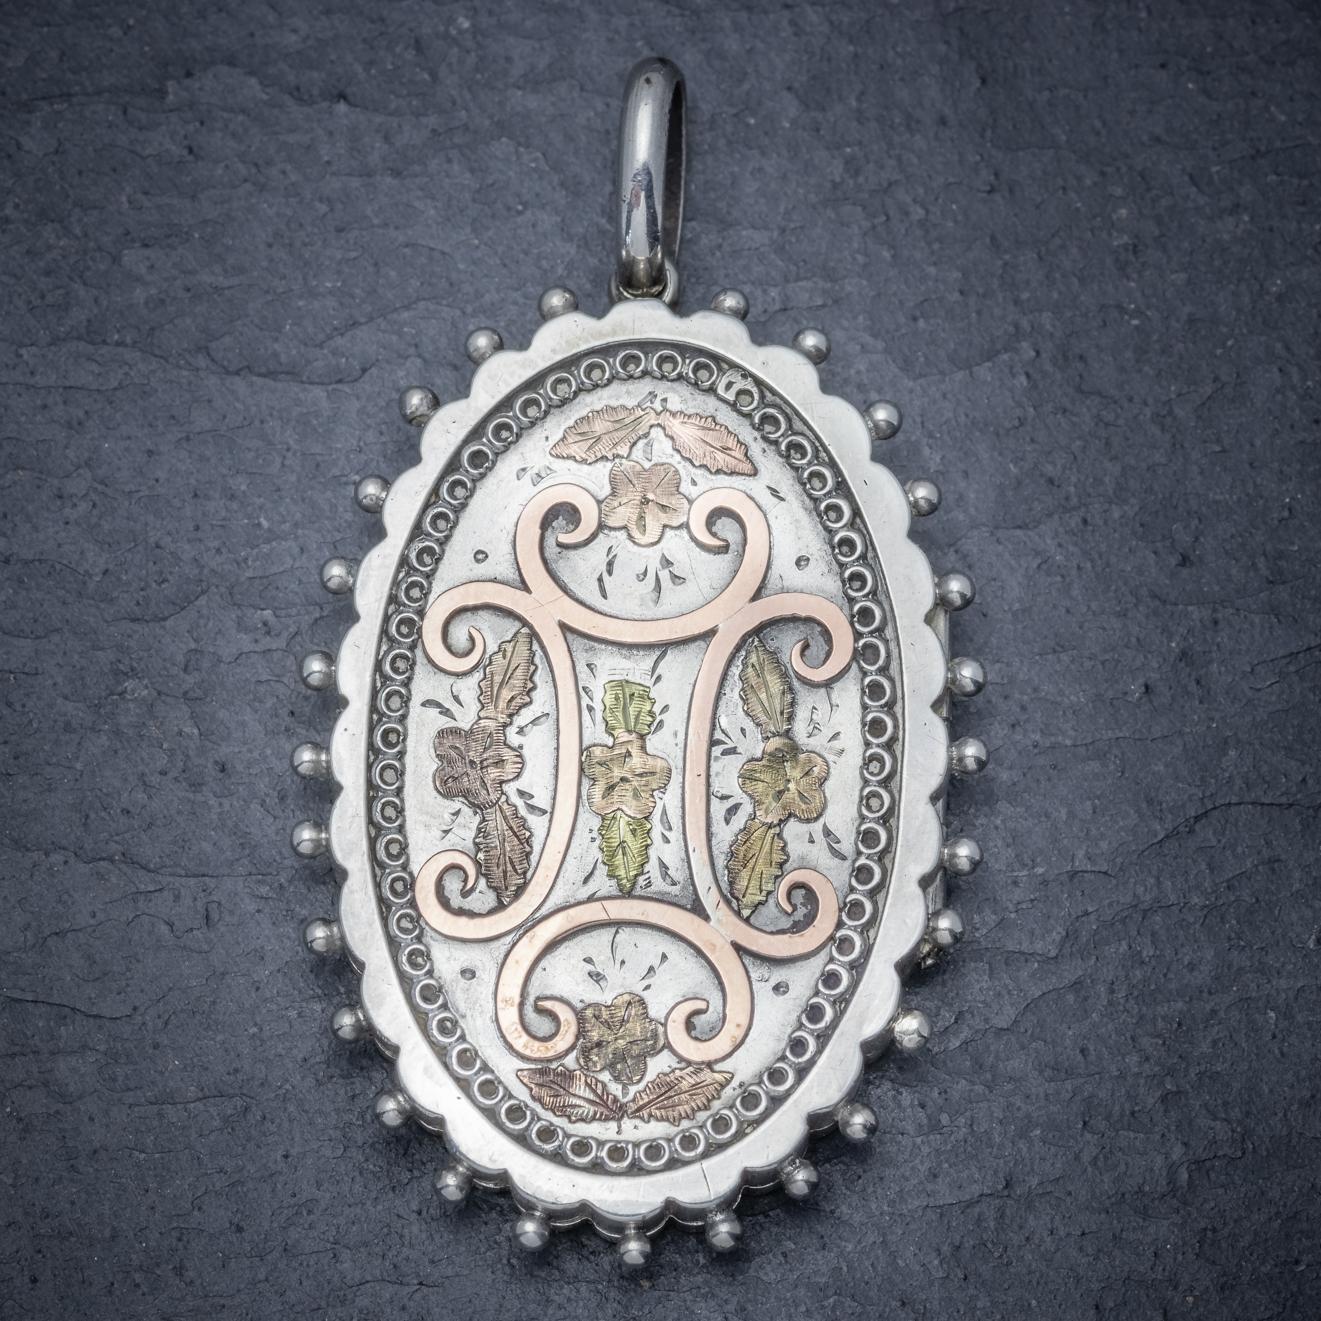 A stunning antique Victorian floral locket C. 1880, engraved with beautiful Forget me nots highlighted in a high carat Yellow/ Rose Gold. 

The locket is fashioned in Silver and haloed with Silver balls and a lovely patterned border.

Complete with